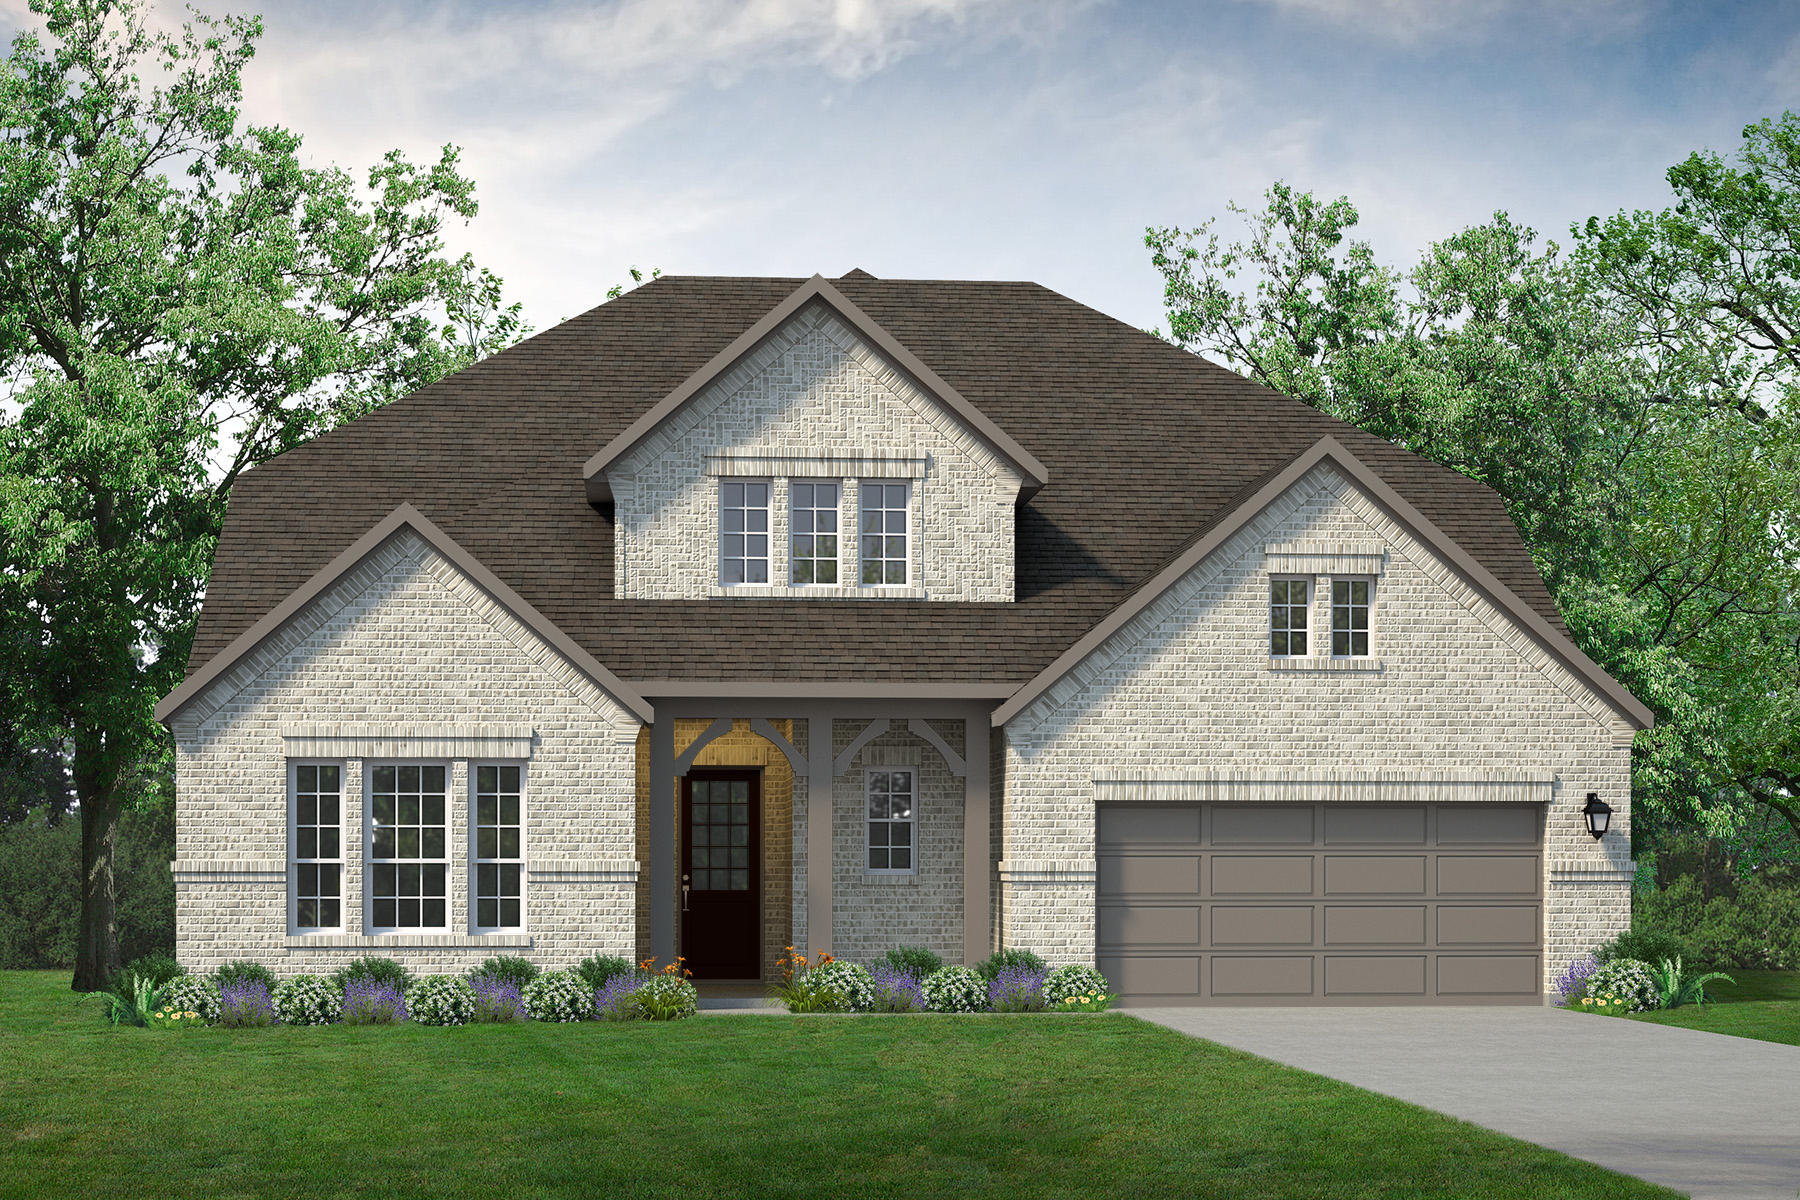 A promotional rendering of a two-story home with a garage.